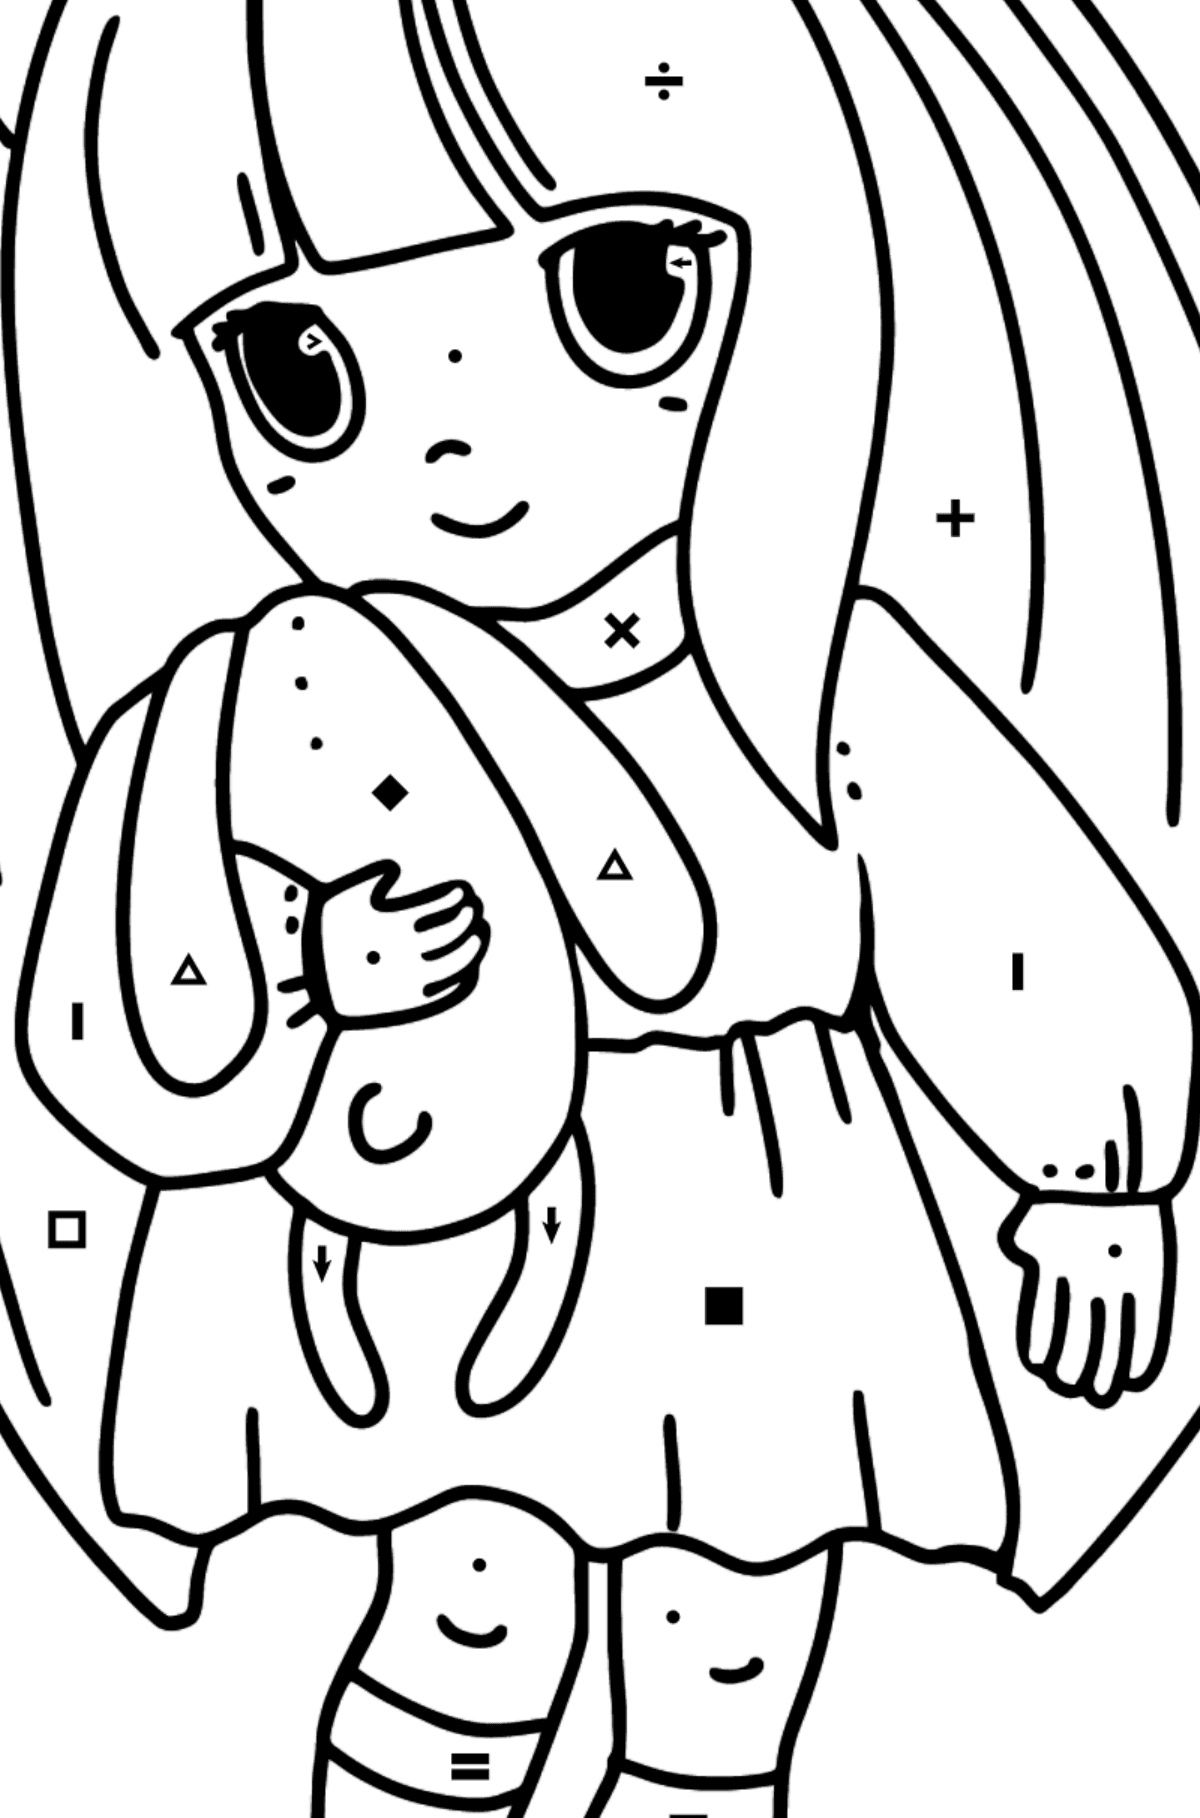 Anime Little Girl Coloring Pages - Coloring by Symbols for Kids